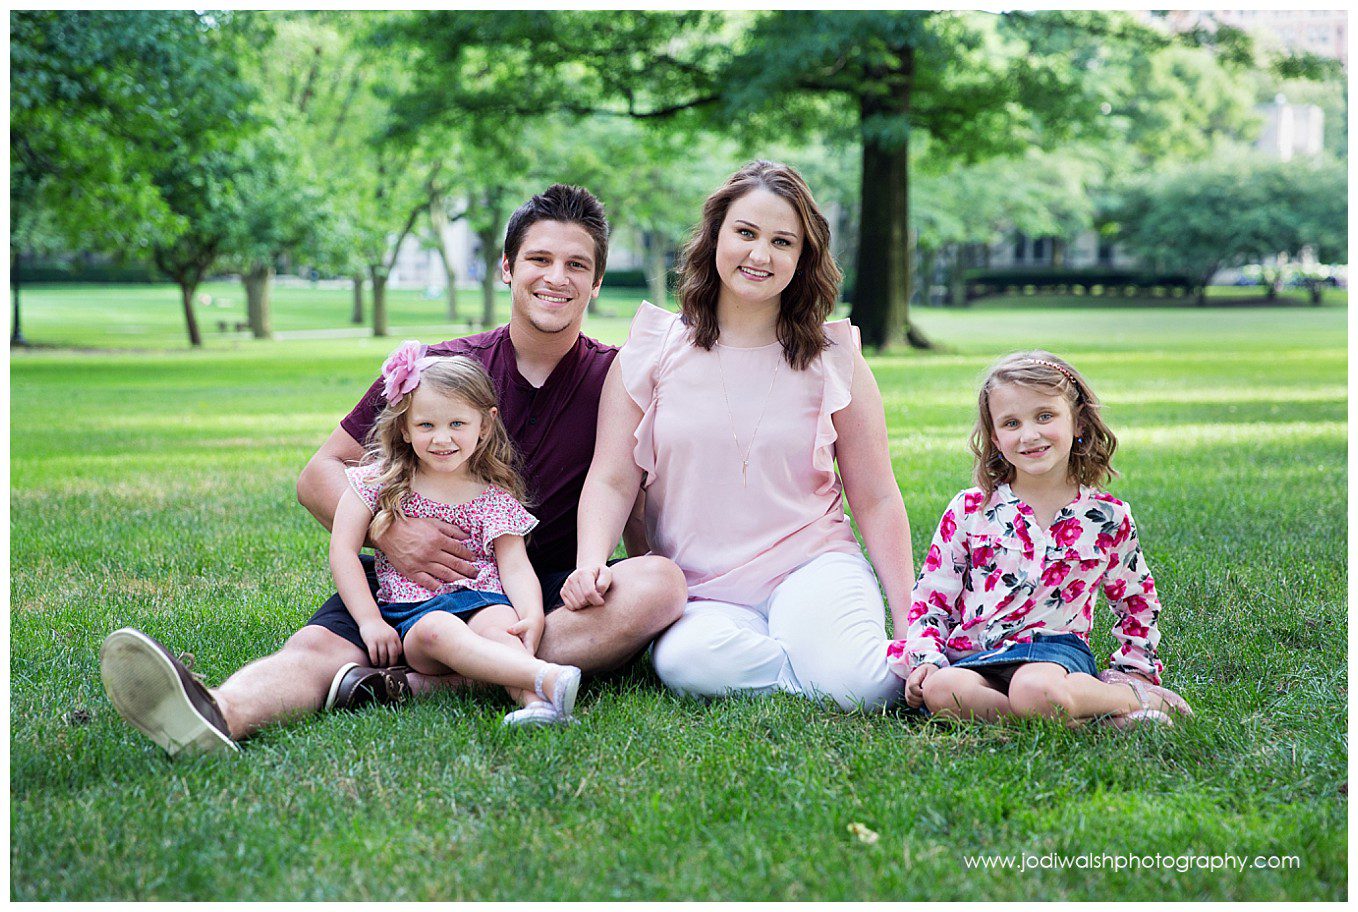 image of a family portrait by Jodi Walsh Photography. the image shows a family with mom, dad, and two young girls sitting on the lawn at the Cathedral of Learning, Pitt campus, Pittsburgh